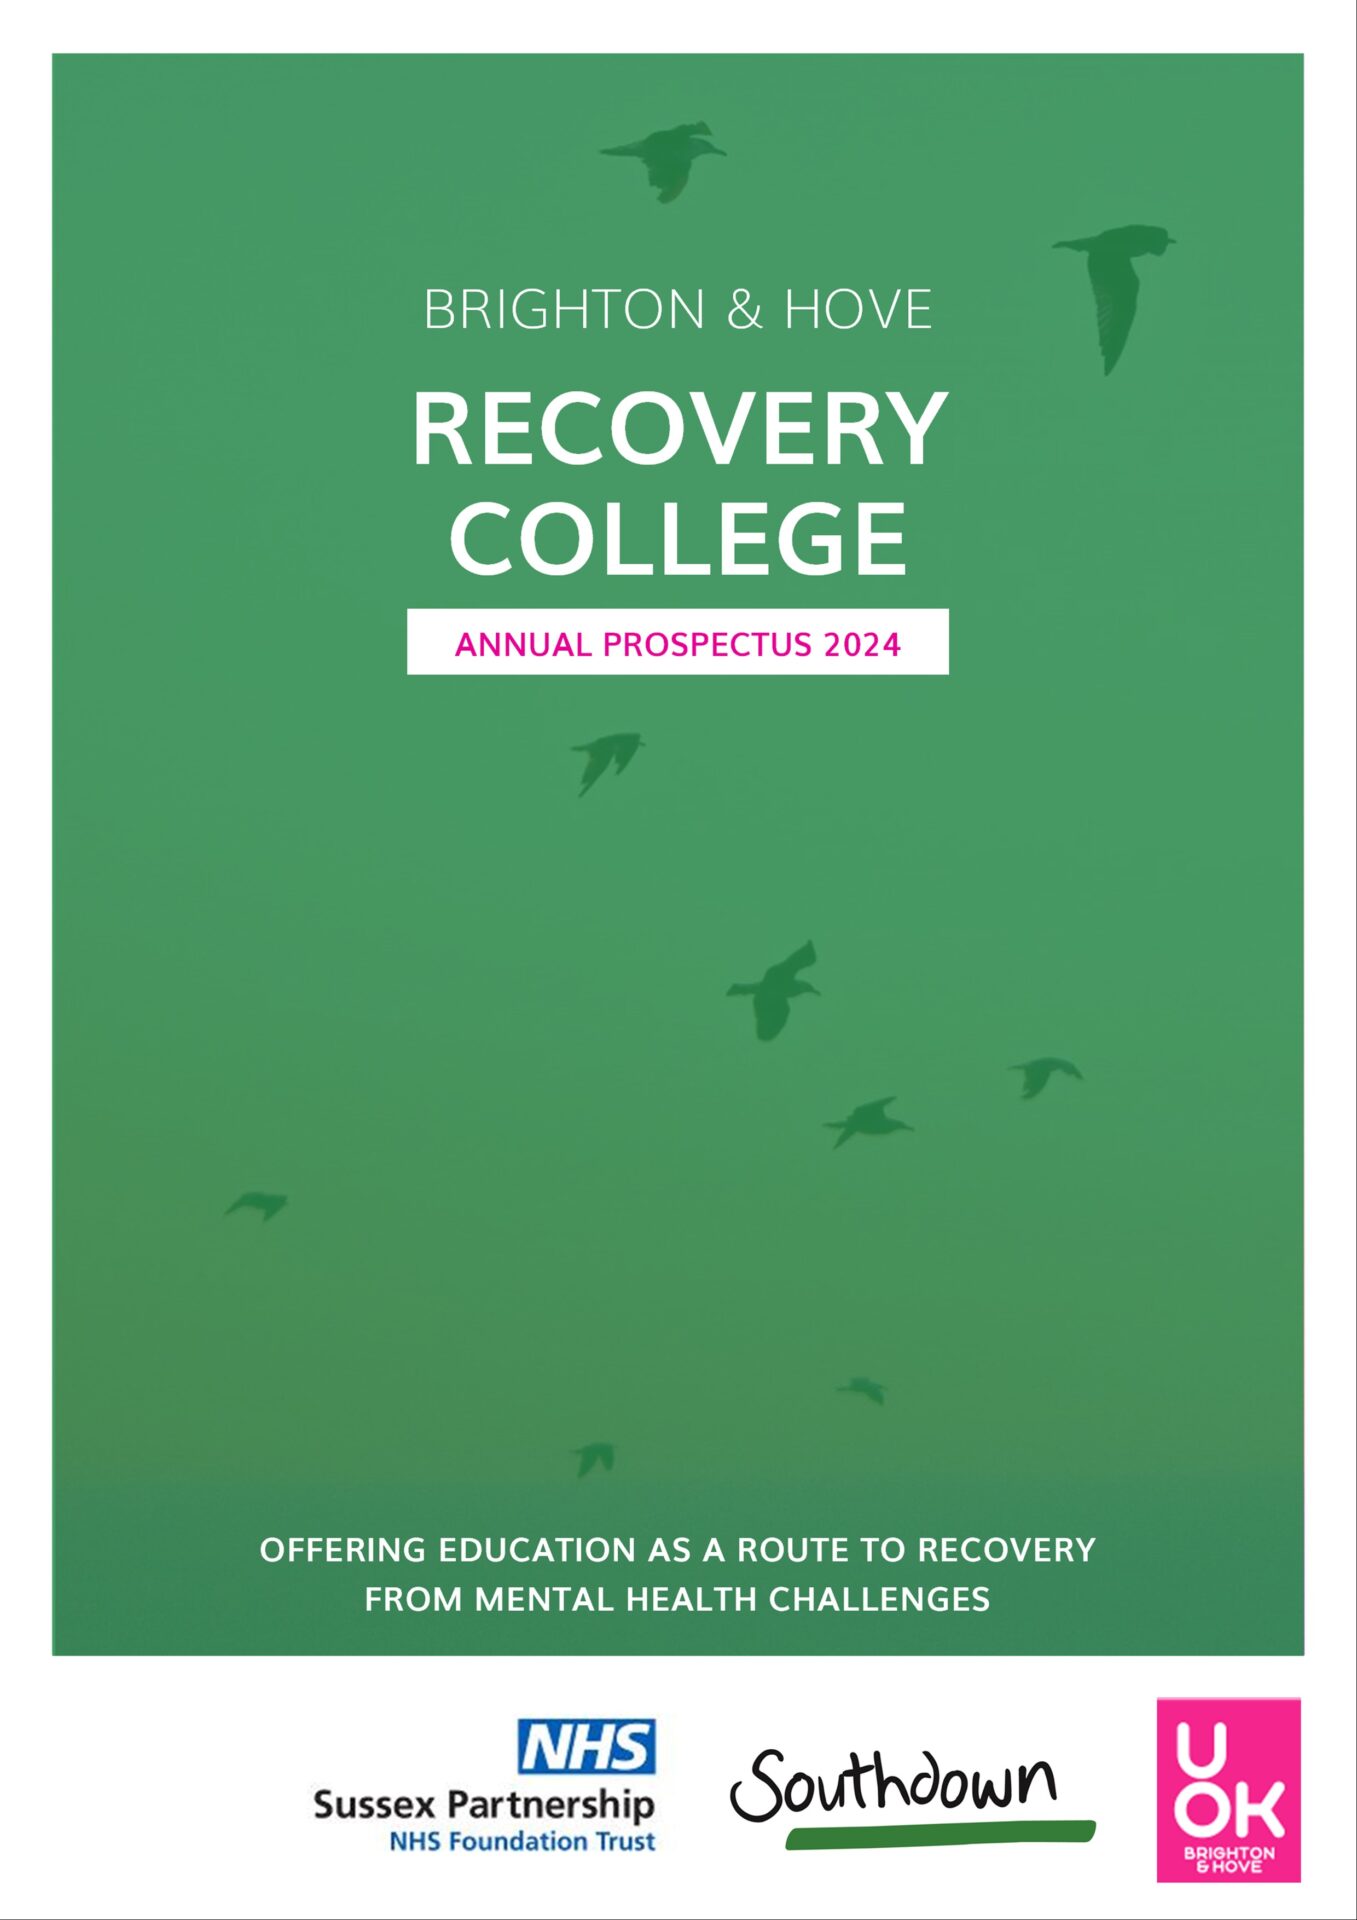 Green background with birds flying in the sky. The text reads: Brighton and Hove Recovery College, Annual Prospectis 2024. Offering education as a route to recovery from mental health challenges. There are three logos in the bottom right hand corner they are: Sussex Partnership NHS Foundation Trust, Southdown, and UOK Brighton and Hove.